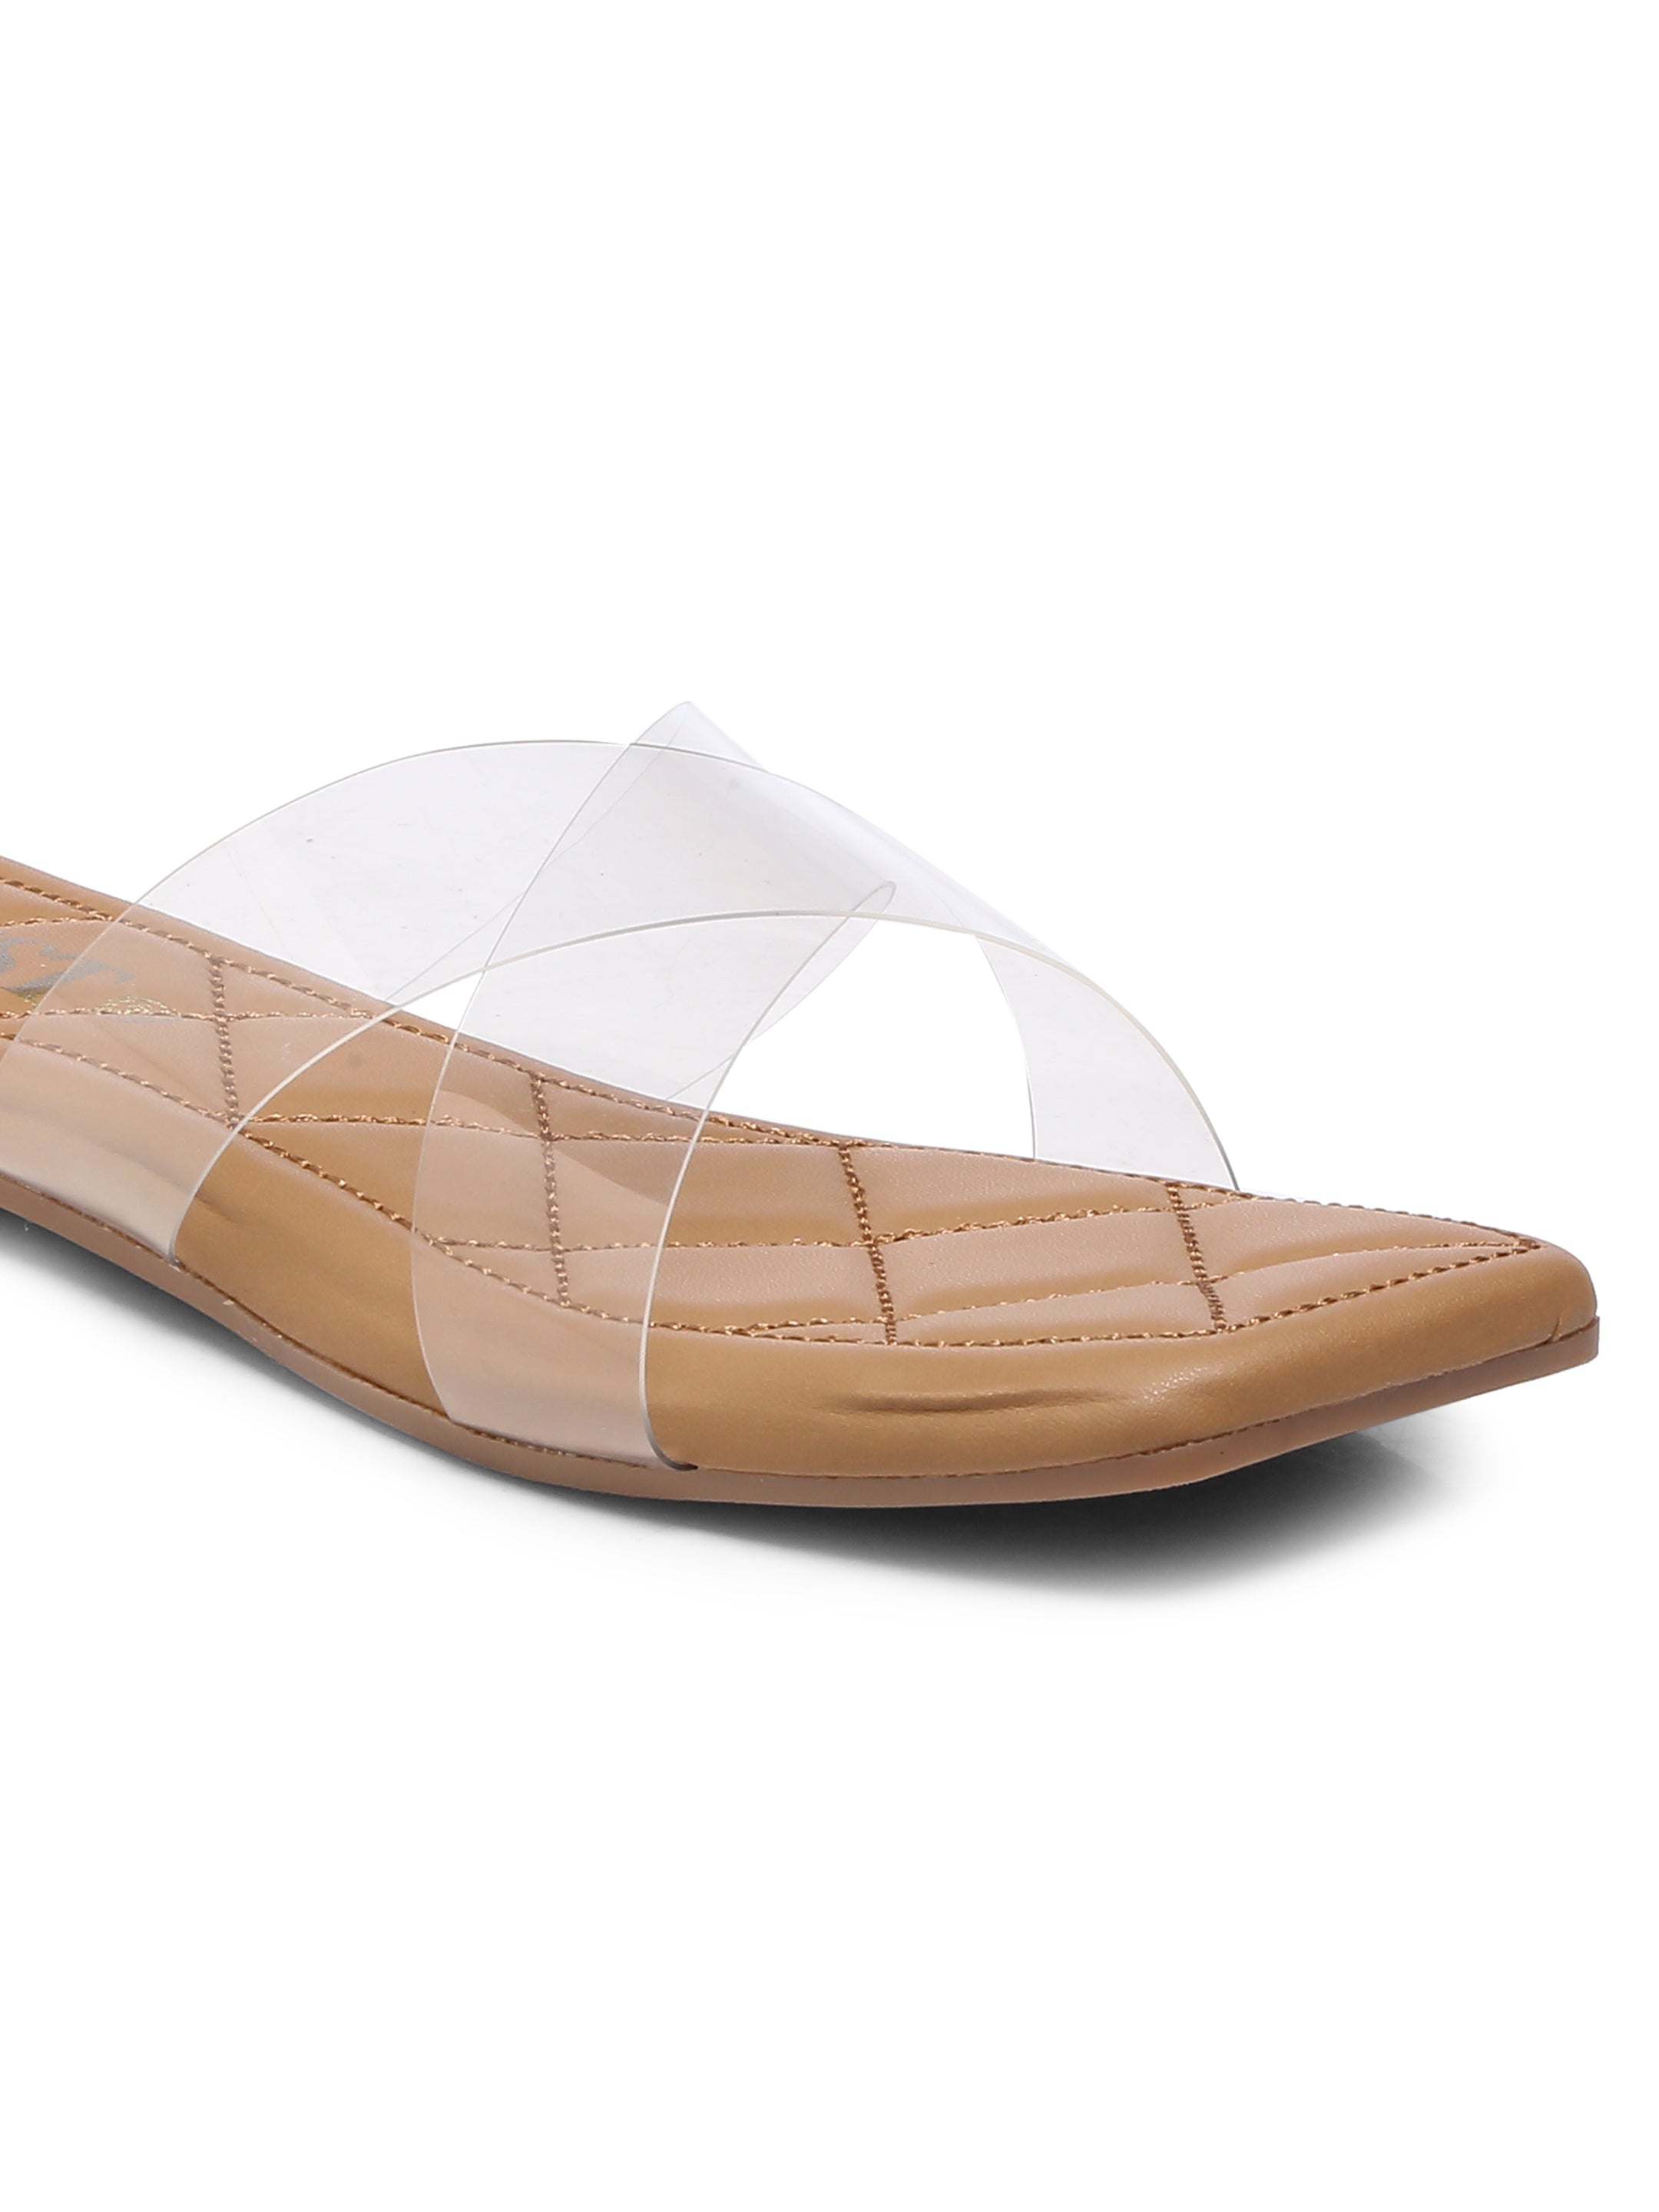 GNIST Clear Cross Strap Nude Flats